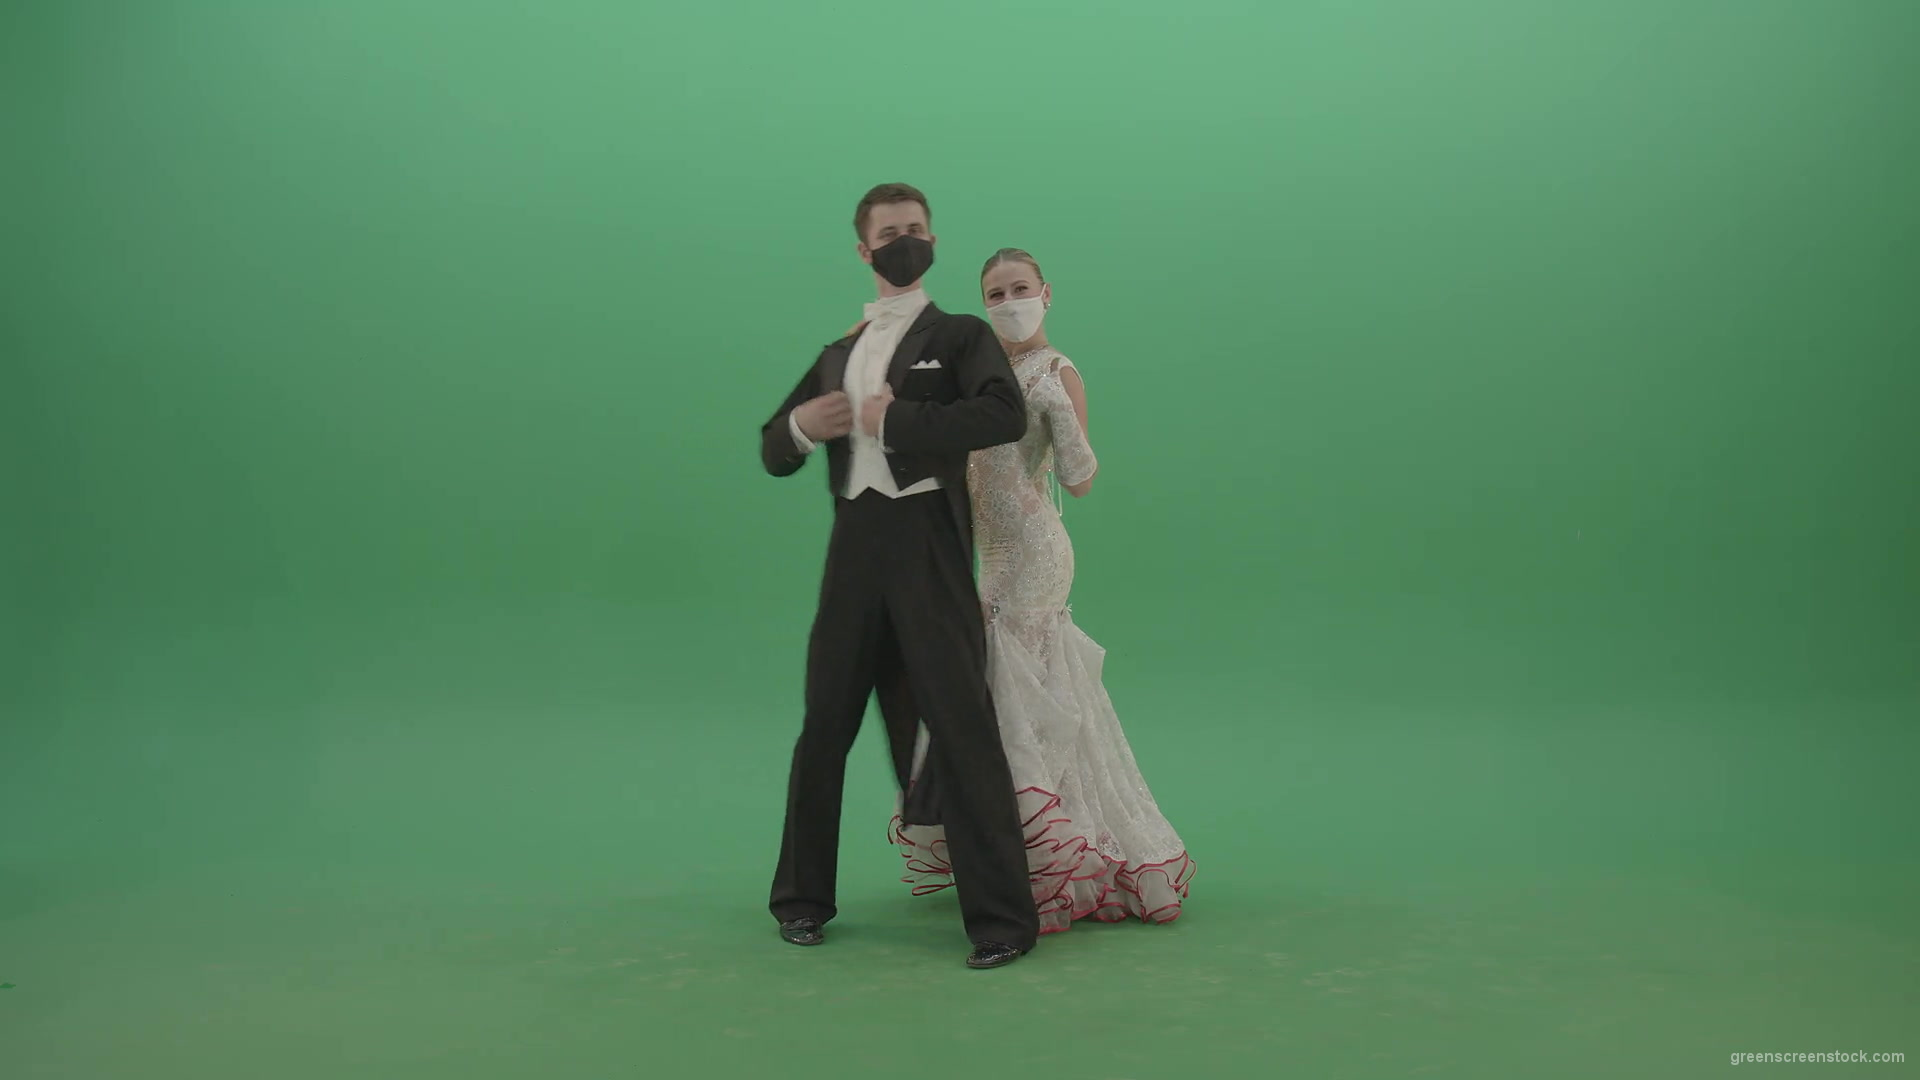 Funny-happy-balleroom-dancers-couple-chilling-and-laughing-on-green-screen-4K-Video-Footage-1920_008 Green Screen Stock